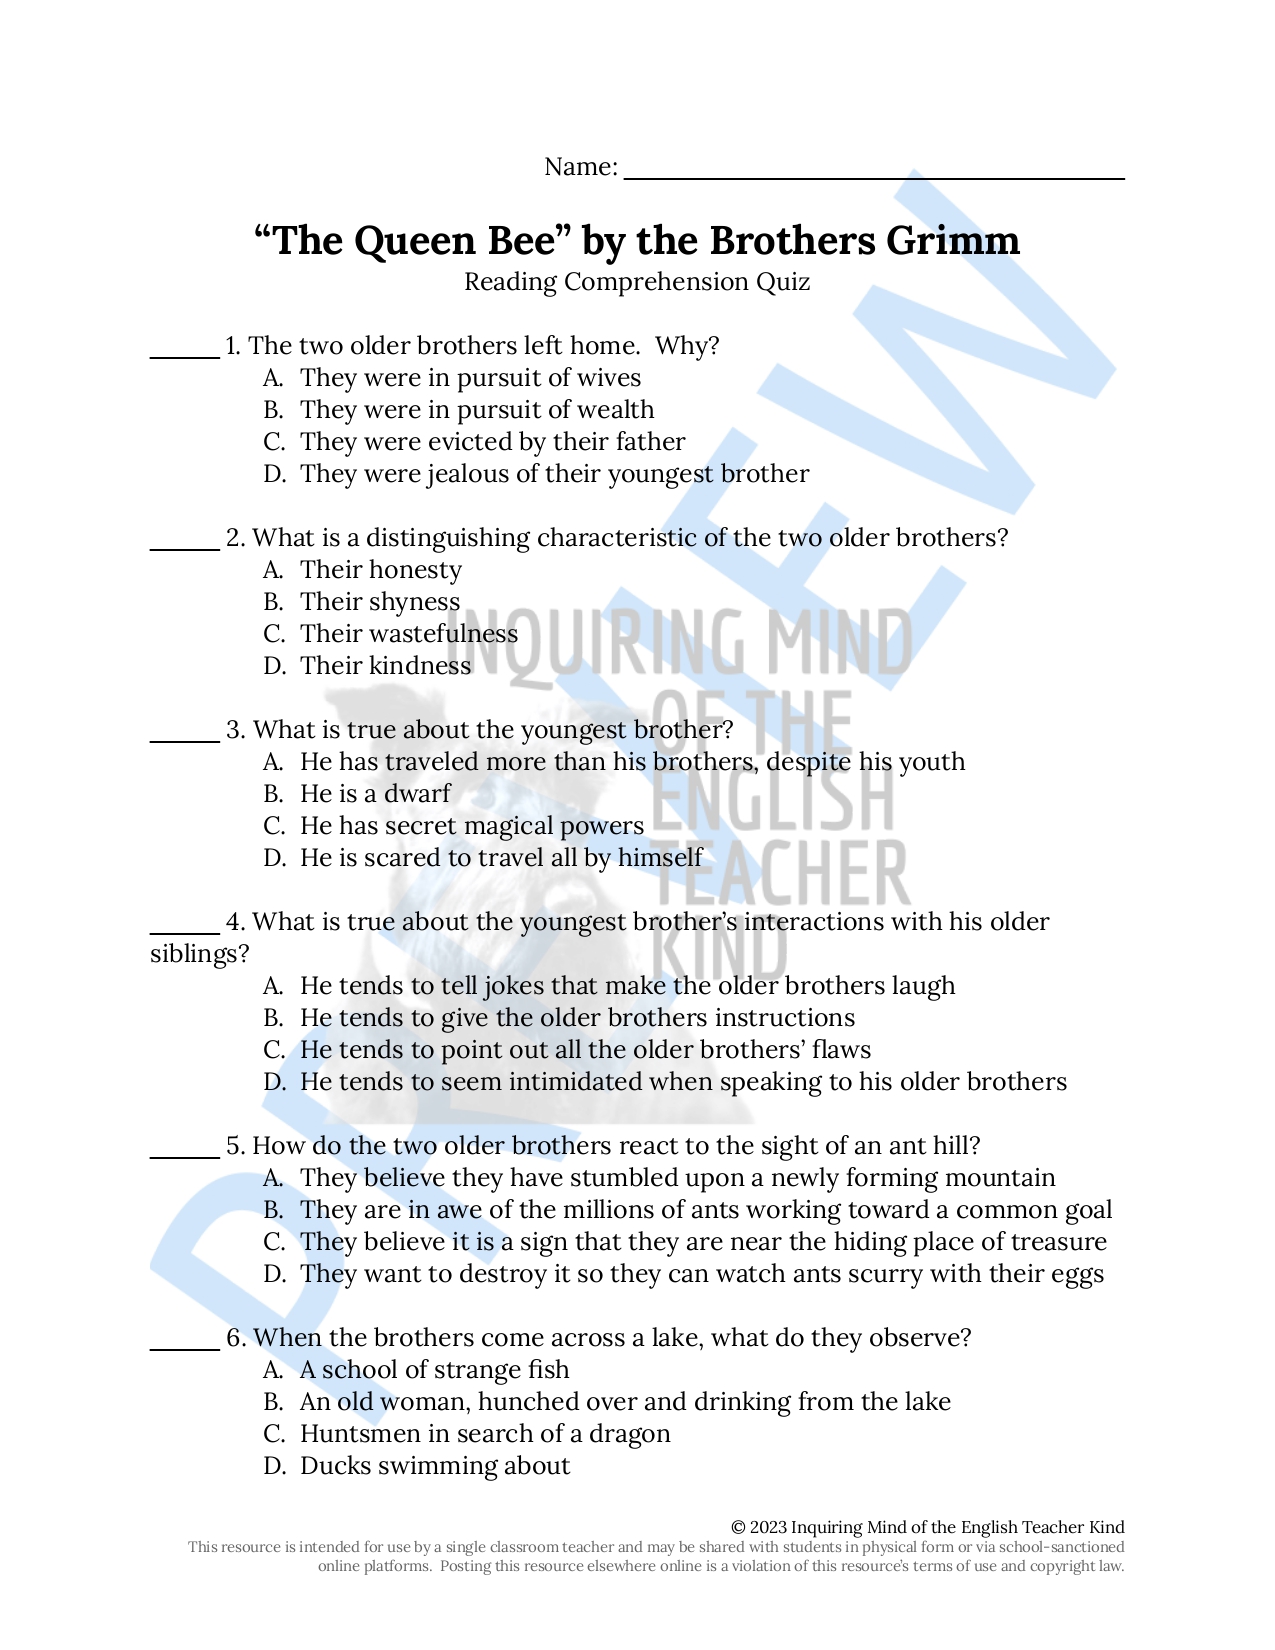 Snow White and the Seven Dwarfs Quiz and Close Reading Bundle - Classful